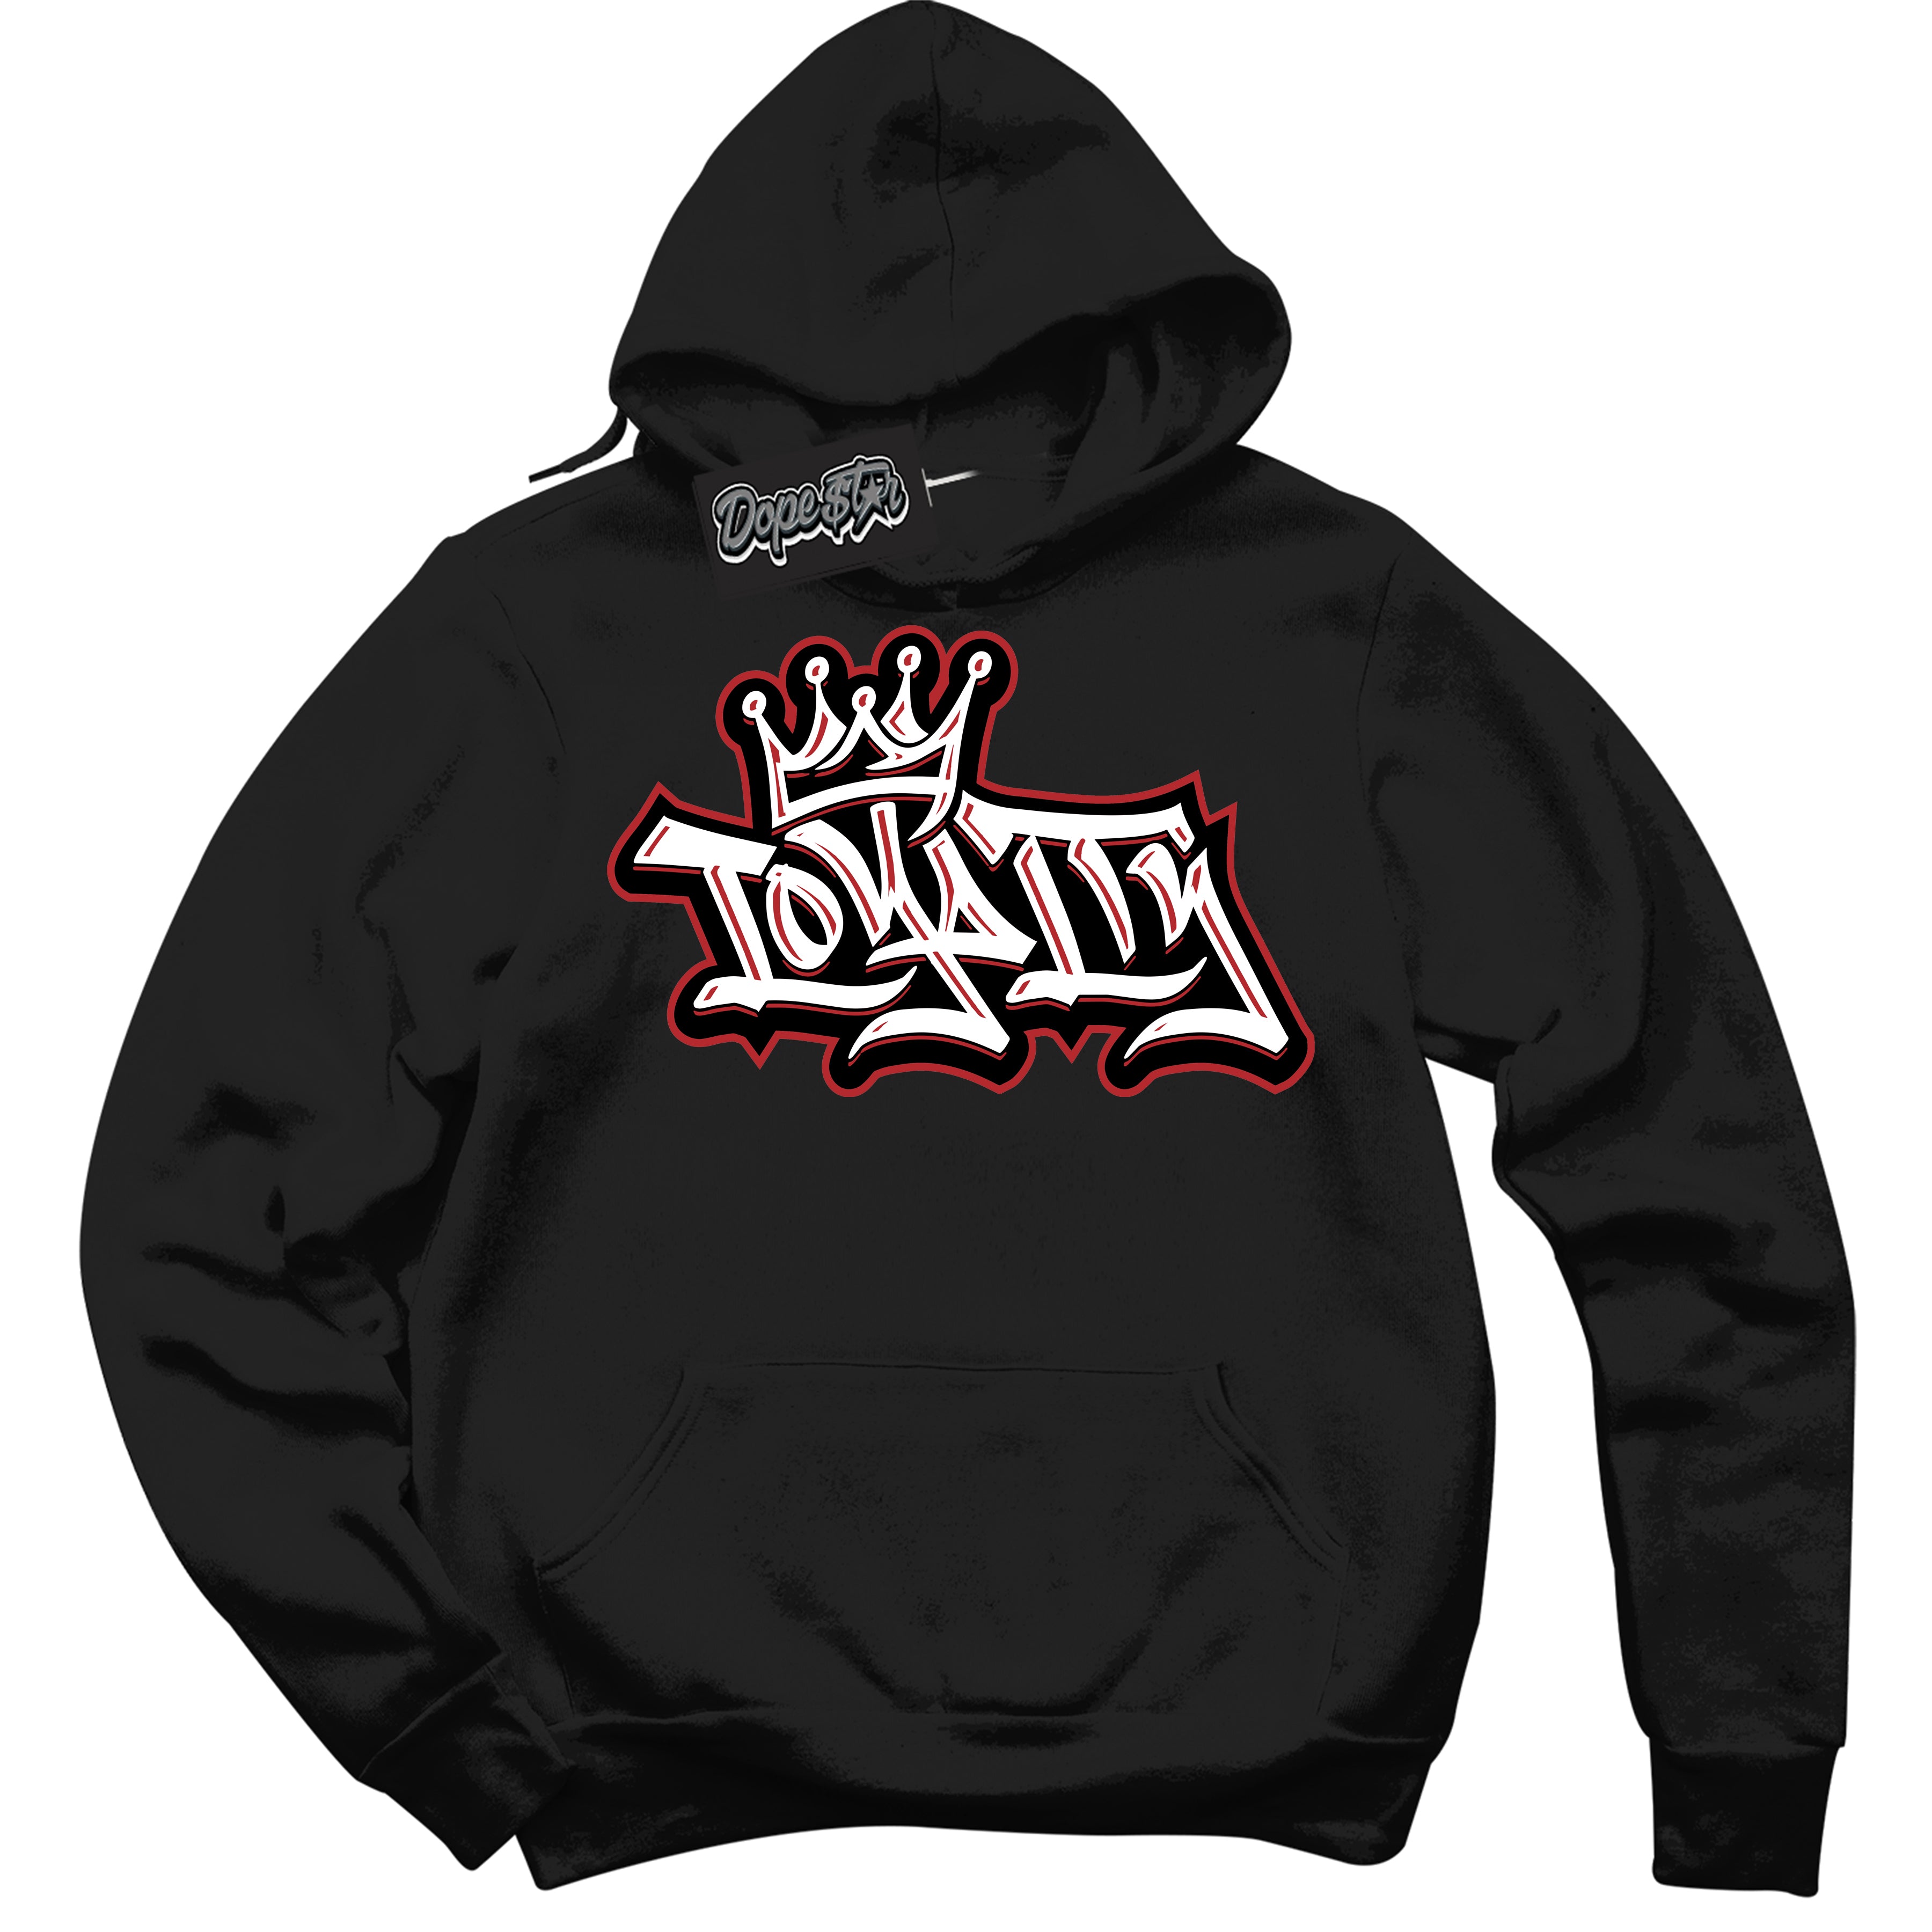 Cool Black Hoodie With “ Loyalty Crown “ Design That Perfectly Matches Lost And Found 1s Sneakers